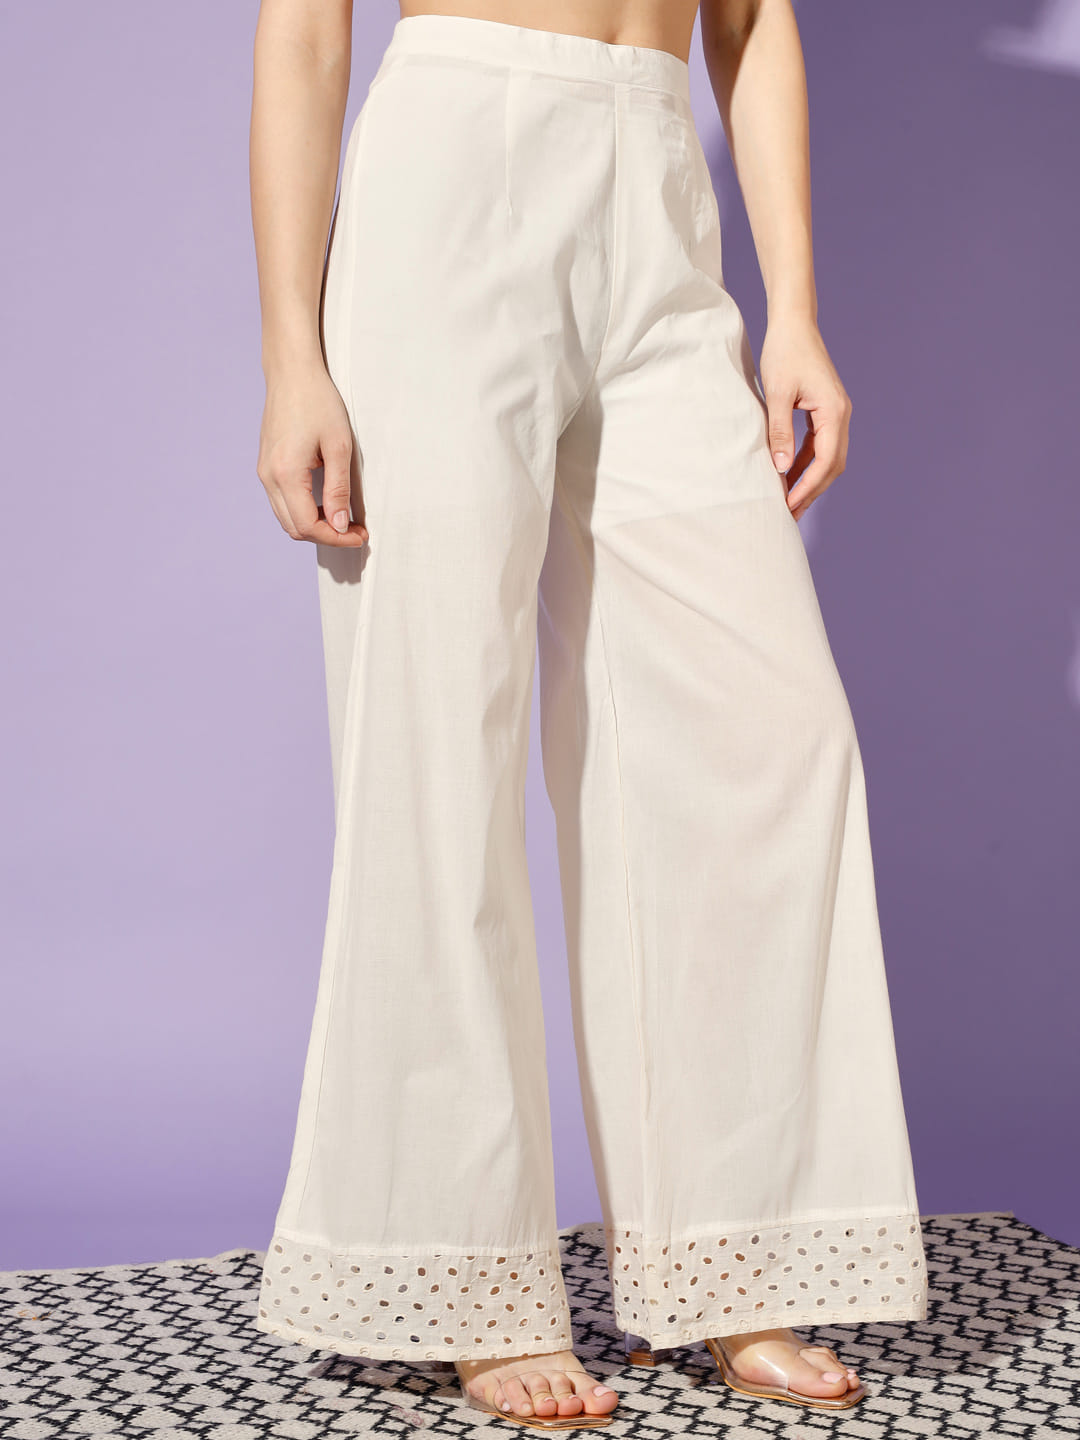 Cotton Dreams: A Cream-Colored 3-Piece Suit | Hues of India